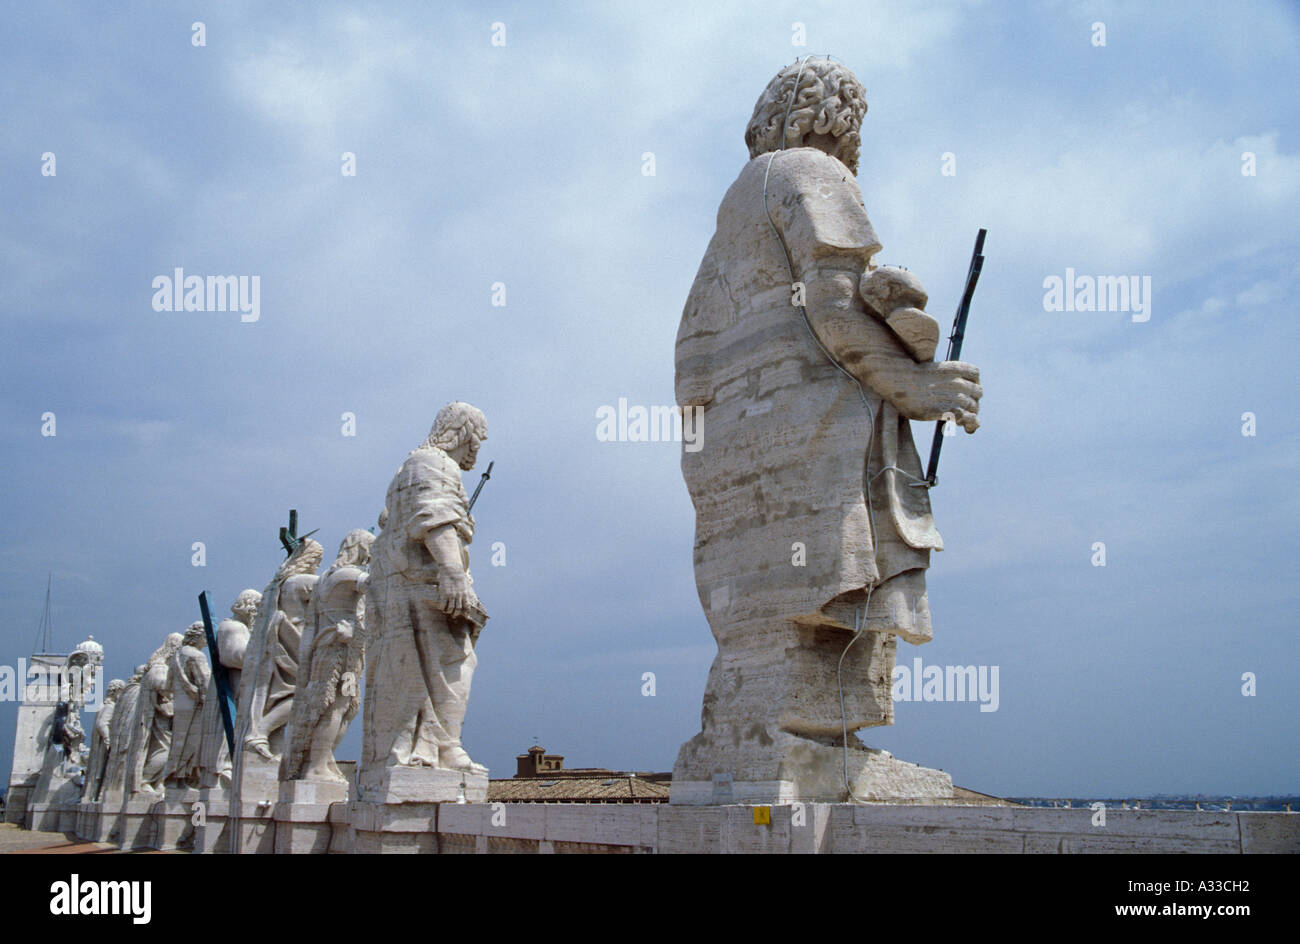 The Apostles looking over St Peter's Piazza, Piazza San Pietro, Rome, Italy Stock Photo